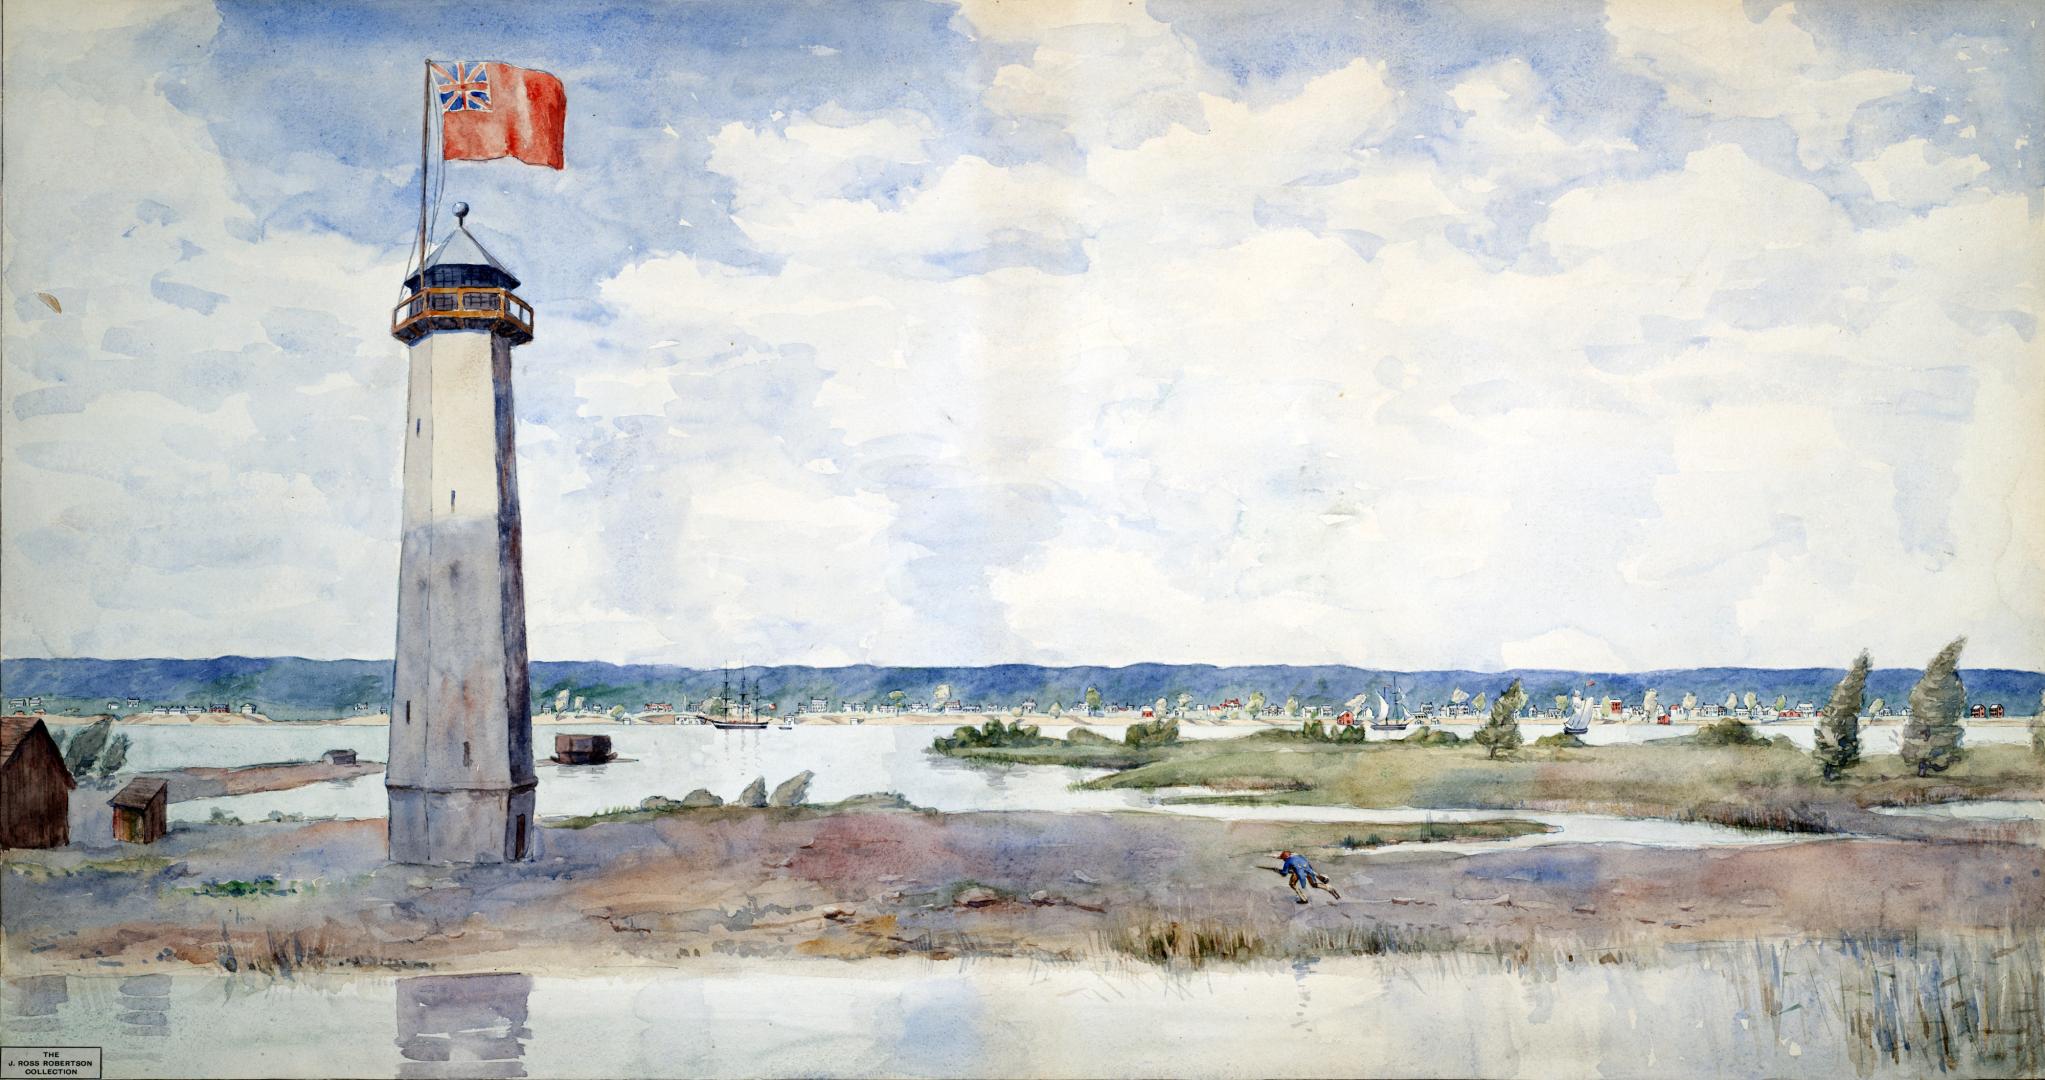 Image shows a lighthouse on the peninsula.